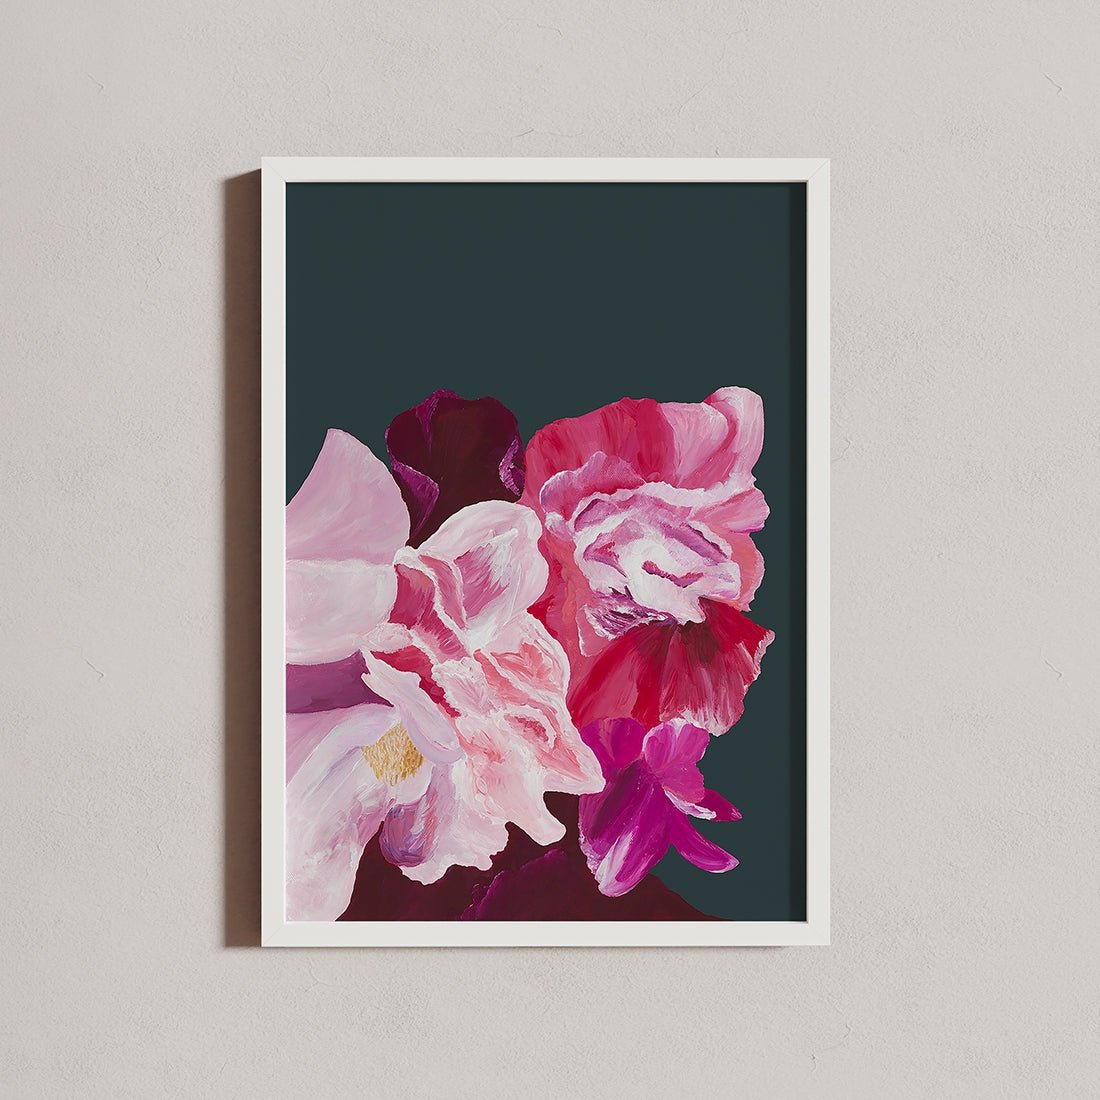 Balanced premium art print with pink and green floral design on wall